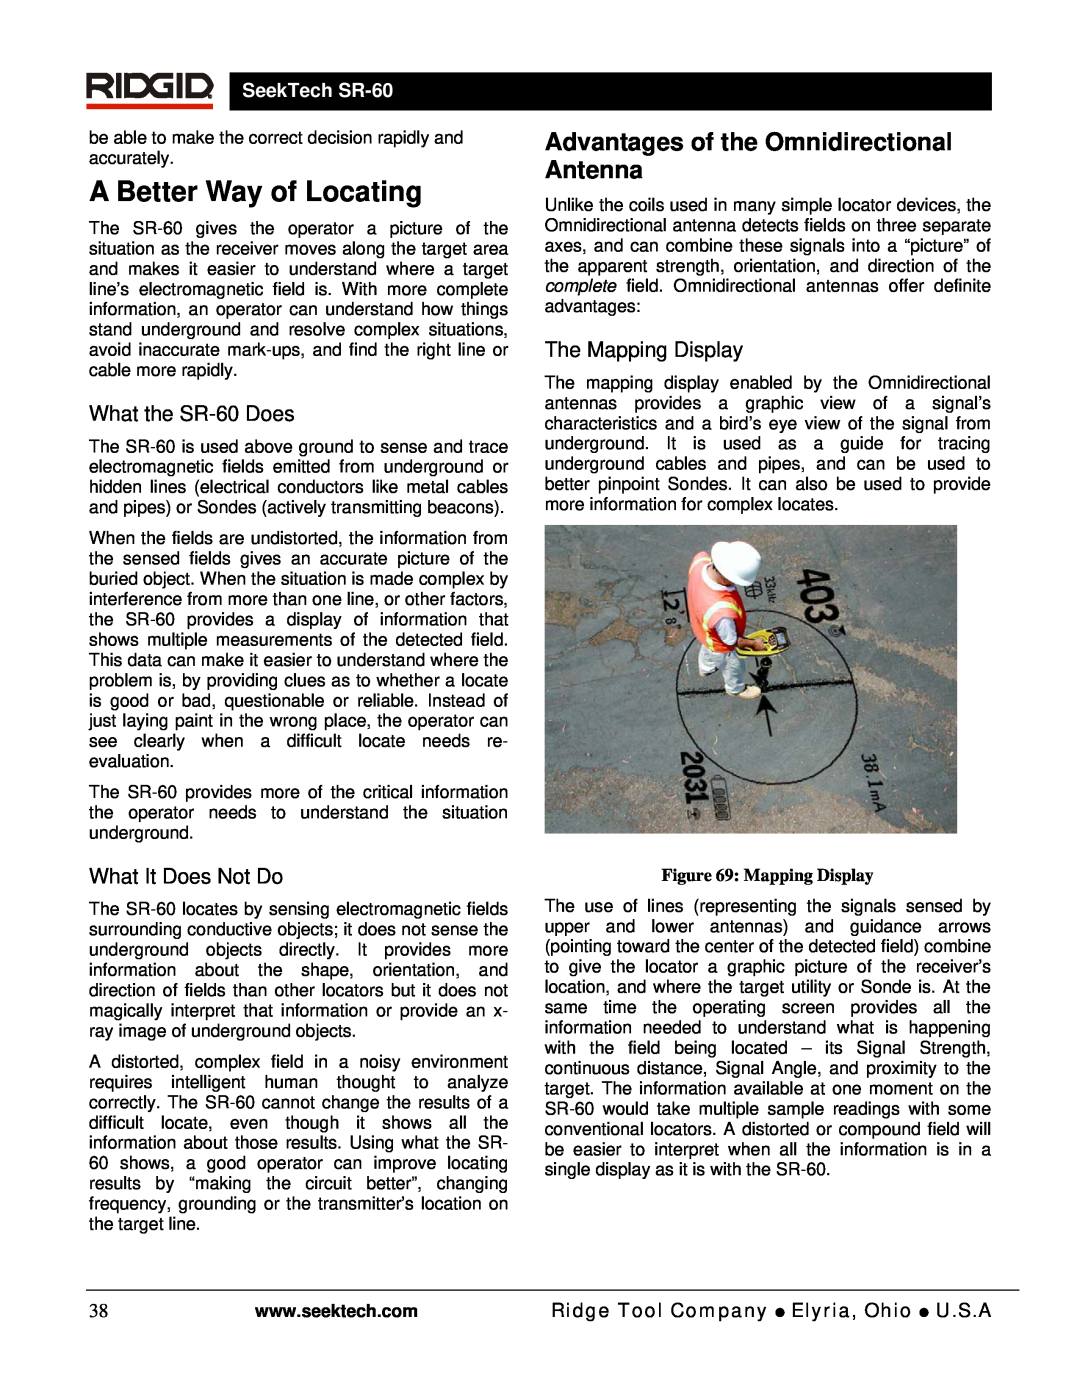 RIDGID A Better Way of Locating, Advantages of the Omnidirectional Antenna, What the SR-60 Does, What It Does Not Do 